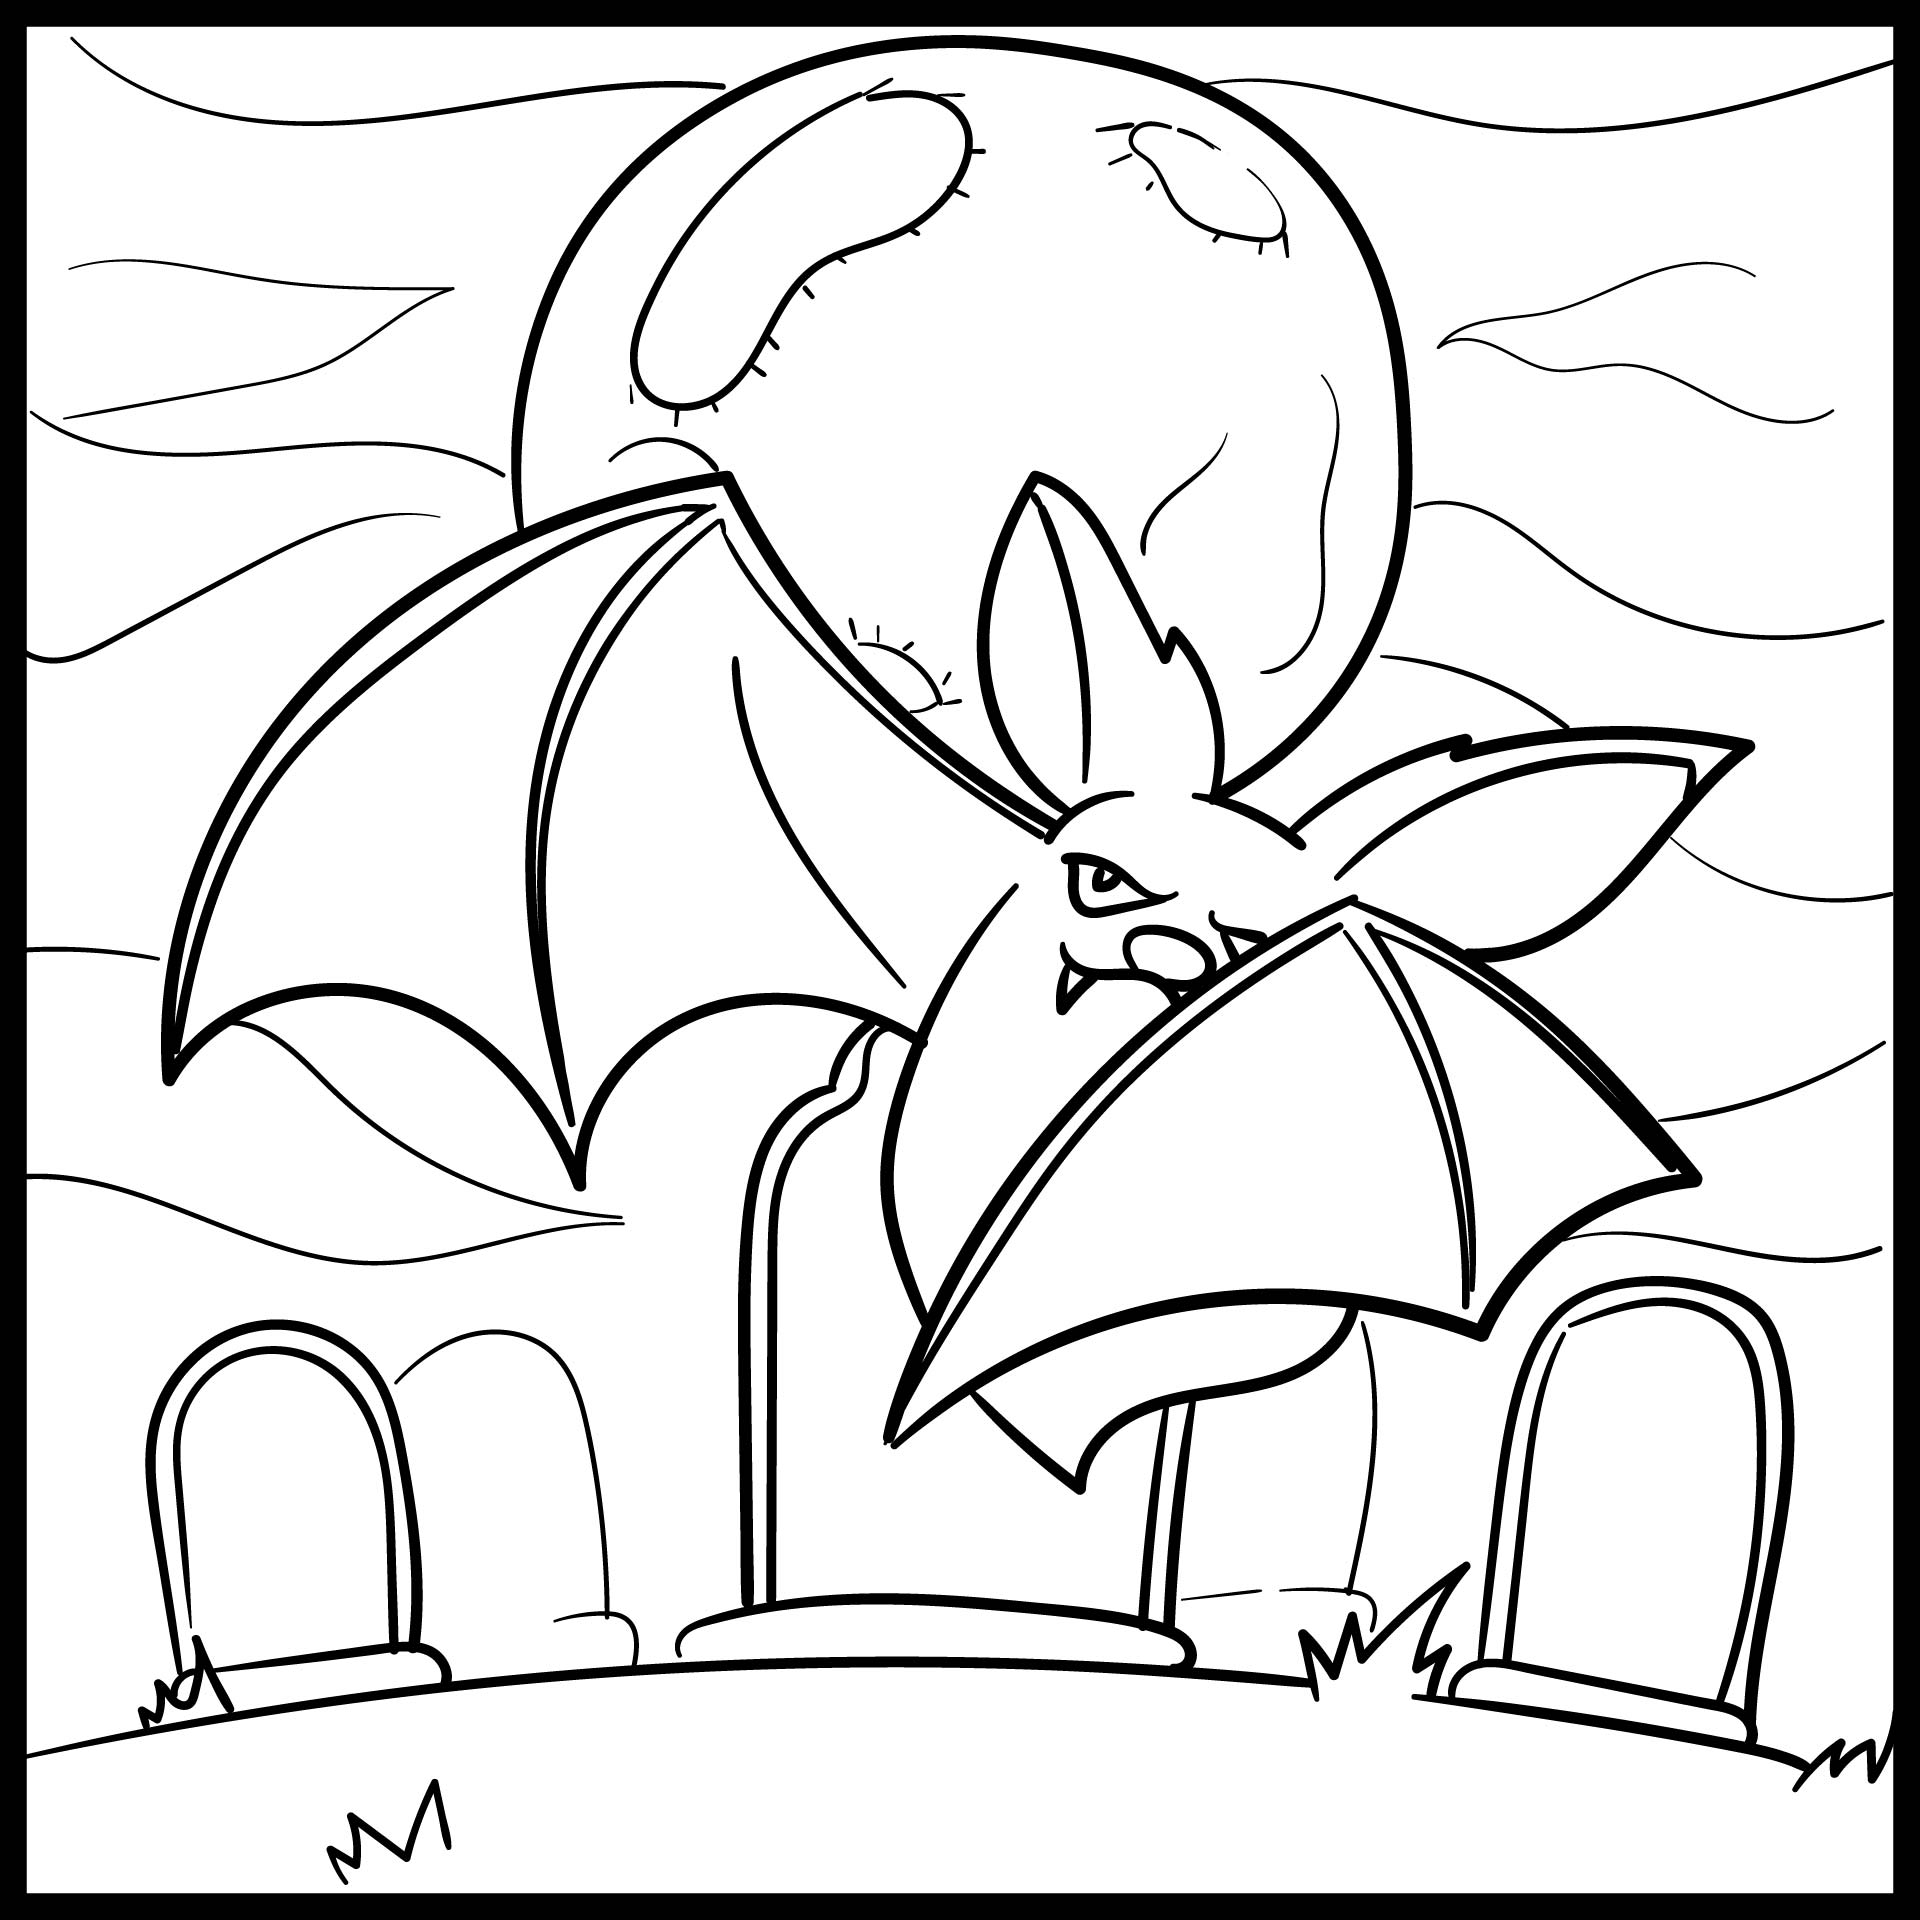 Printable Bats Coloring Pages